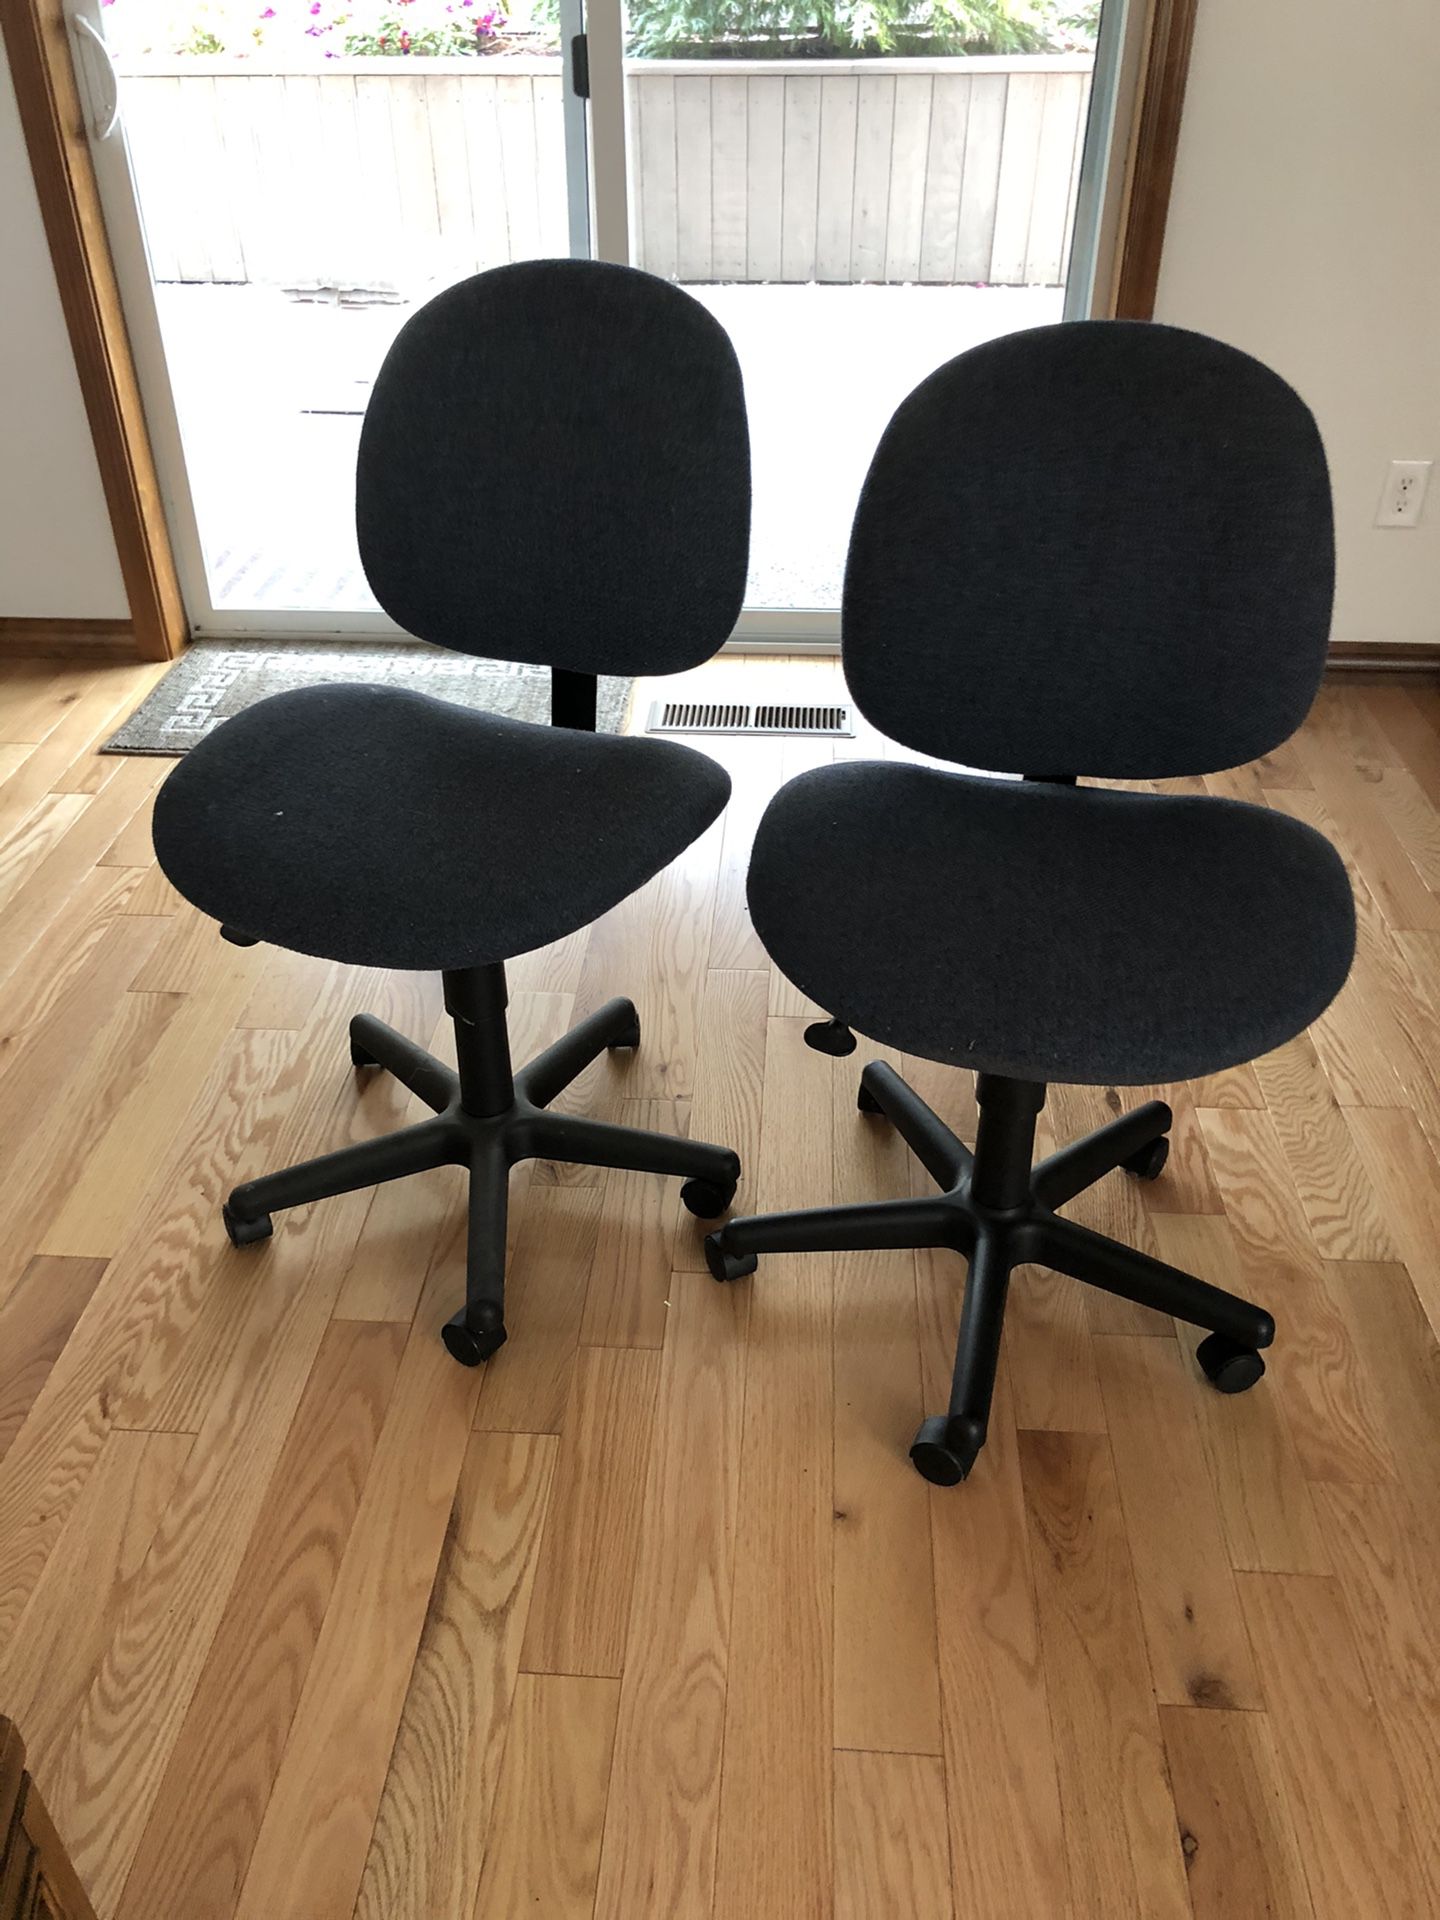 Desk Chairs - FREE